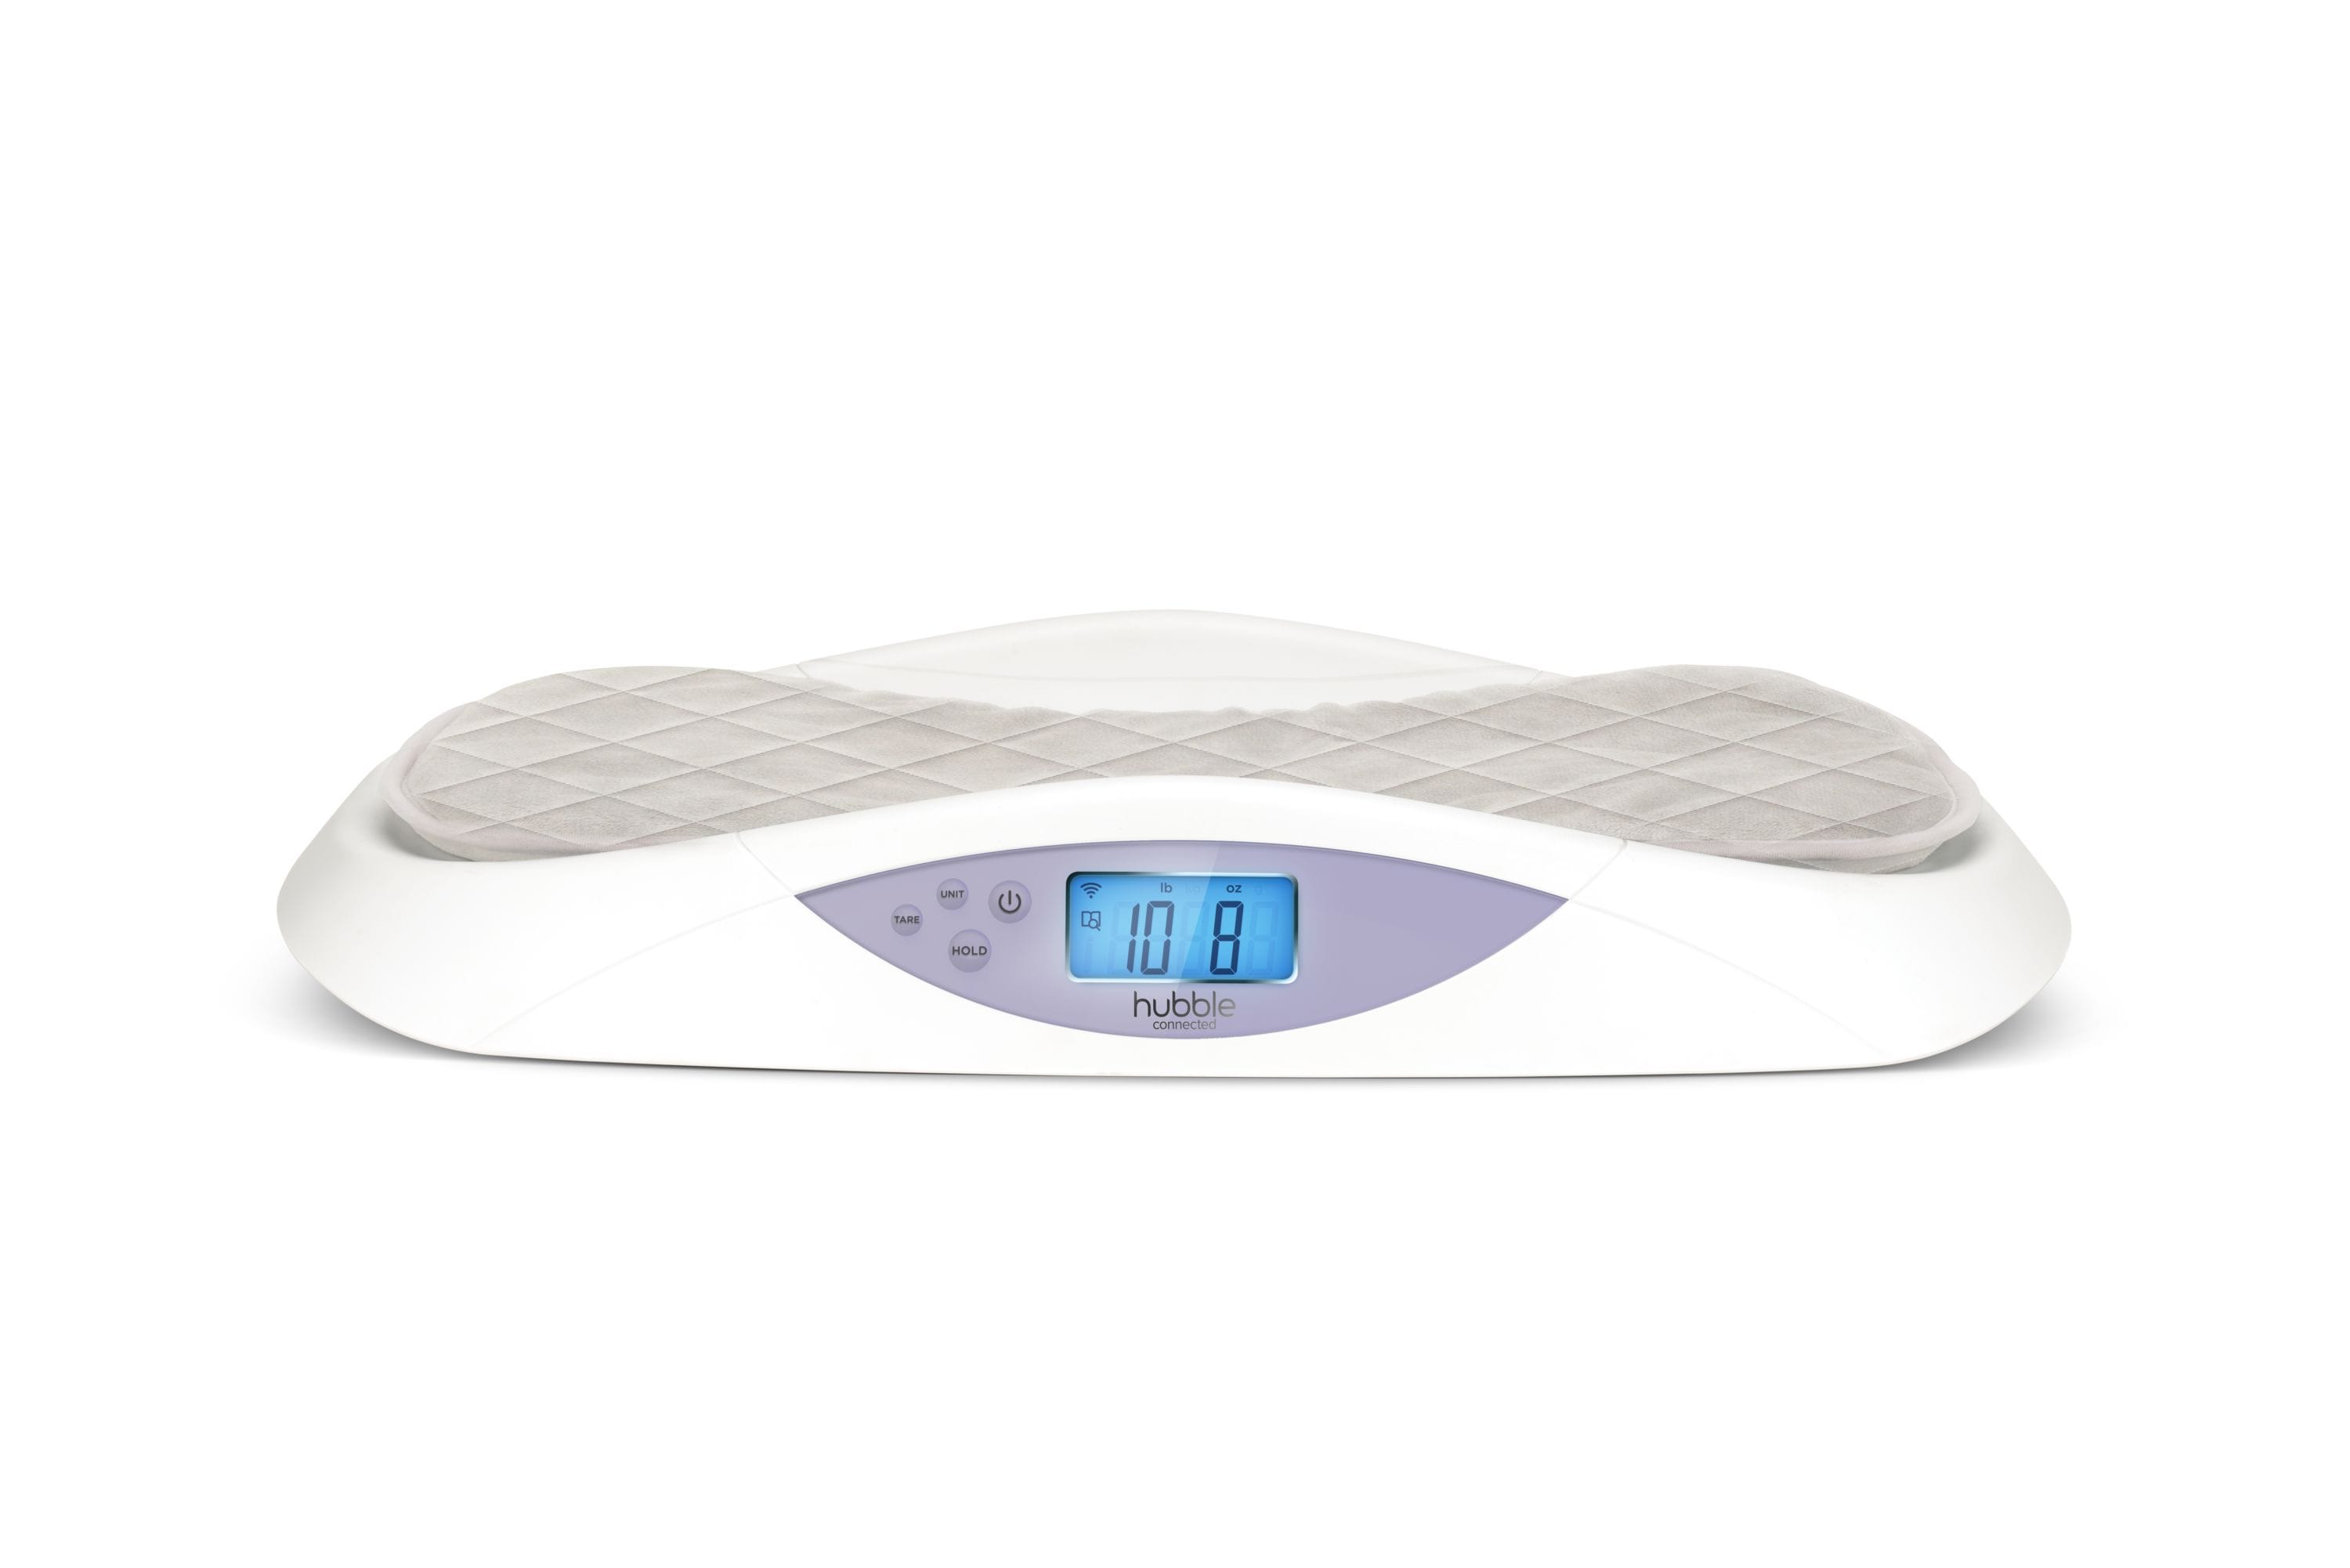 Lwory Digital Egg Scale - Accurate Humidity Measurement and Egg Sizing 